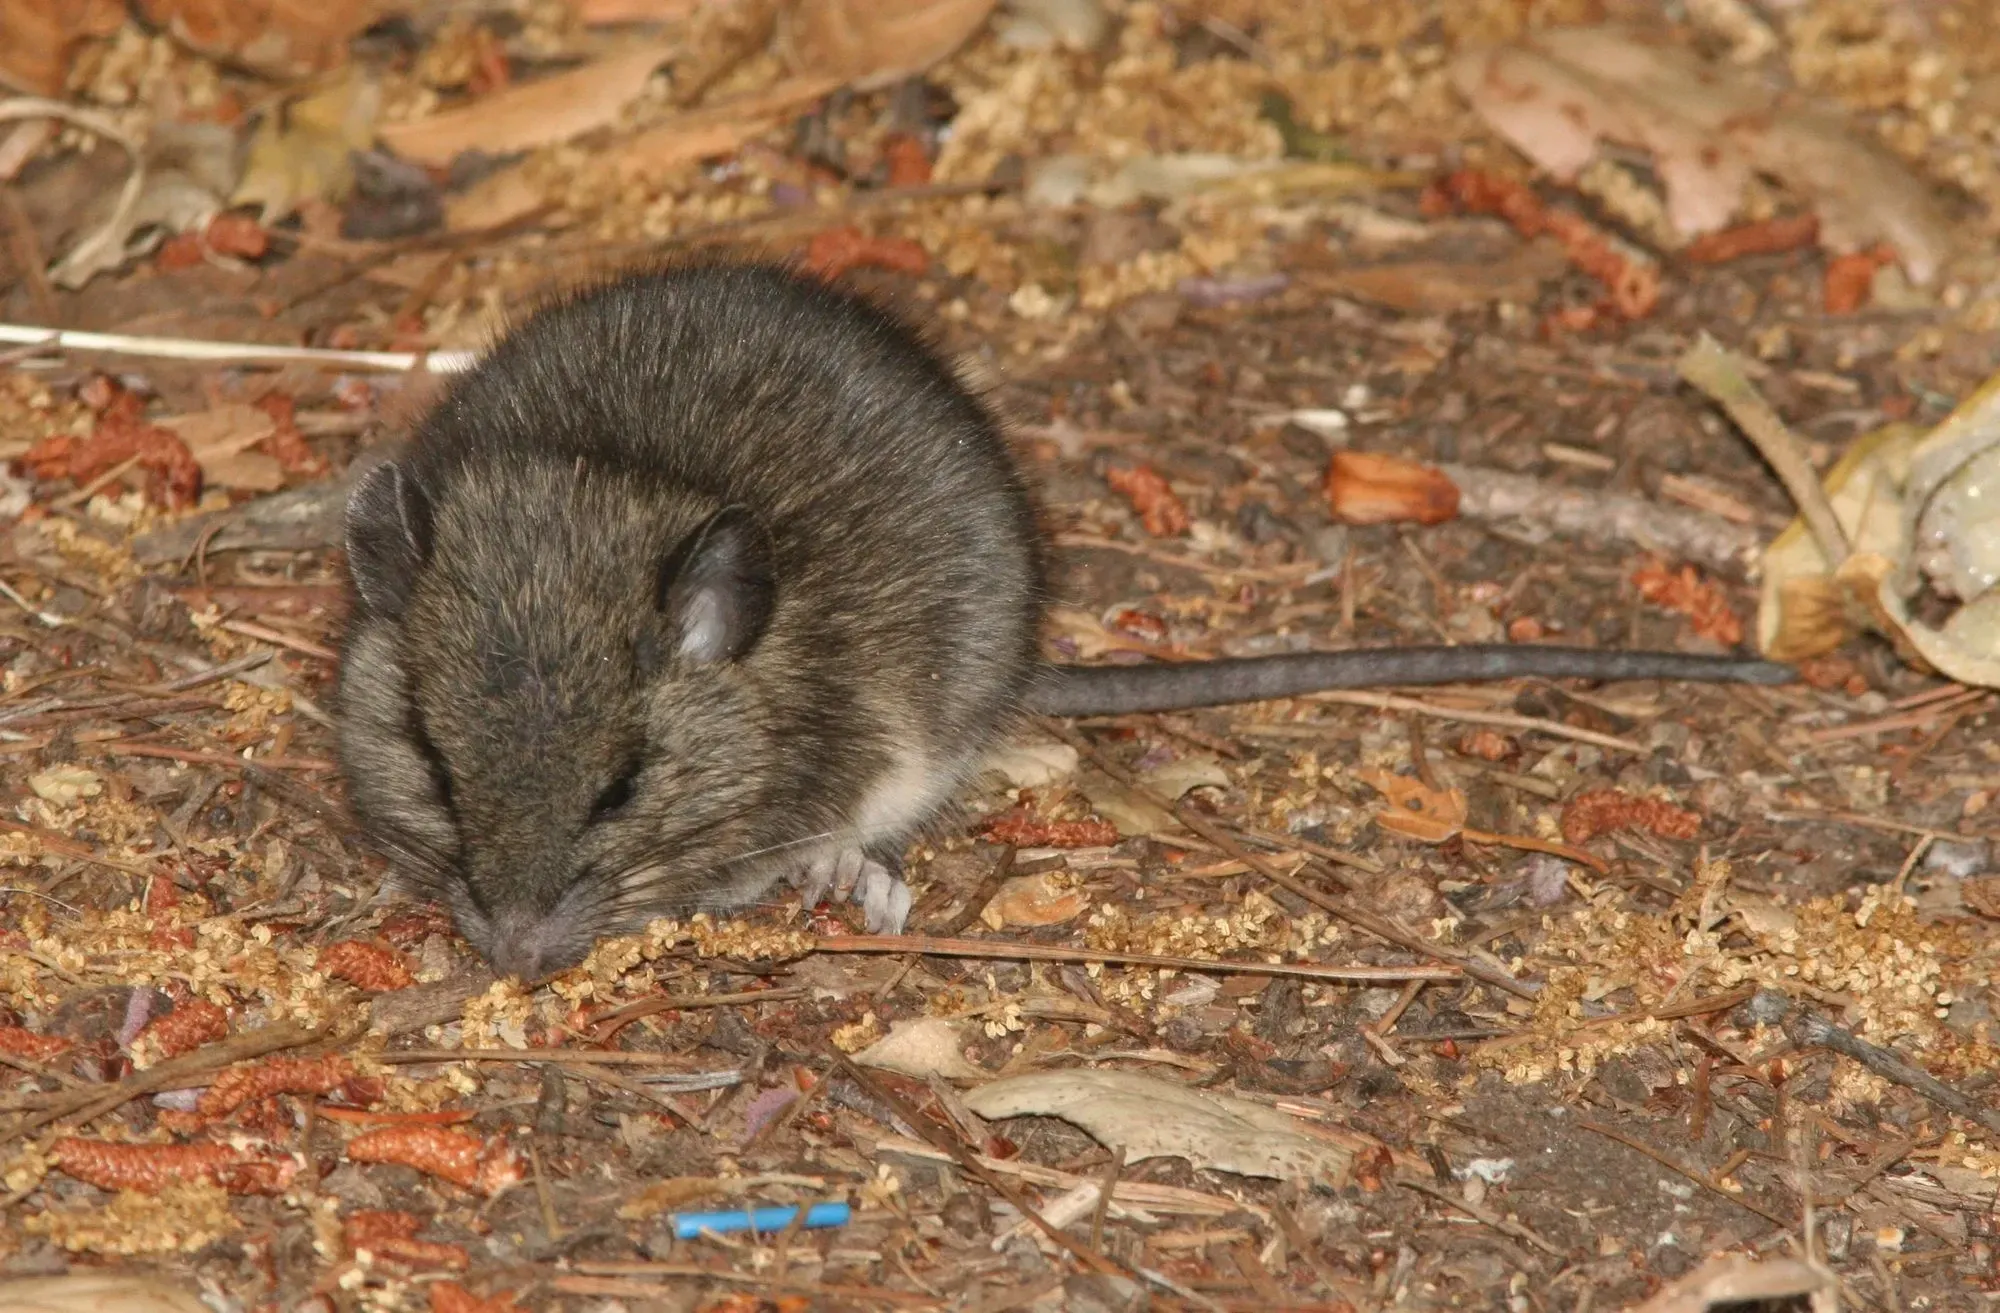 California mice facts are all about their diet, predators, behavior, and nests.